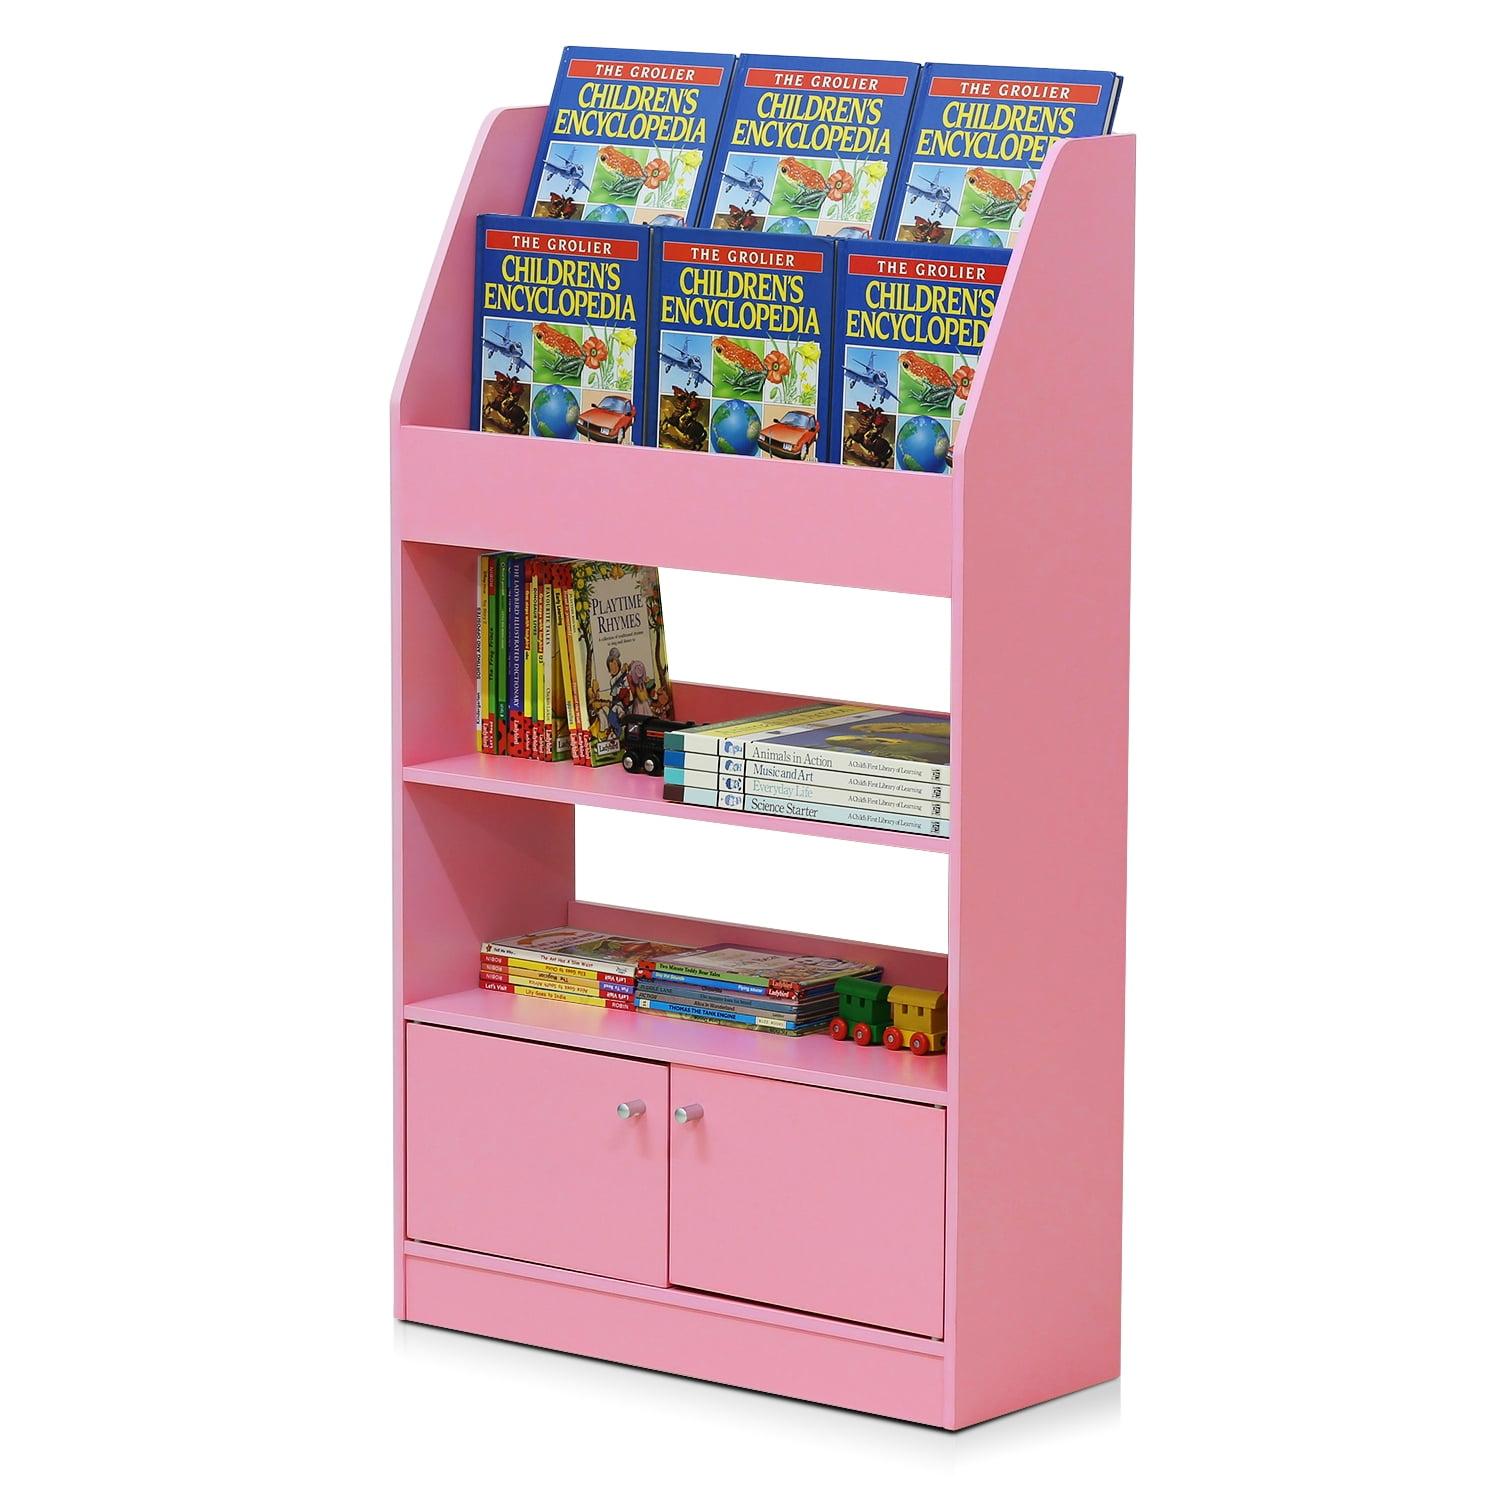 Contemporary Laminated Pink Wood Bookshelf for Kids with 4 Tiers and Cabinet